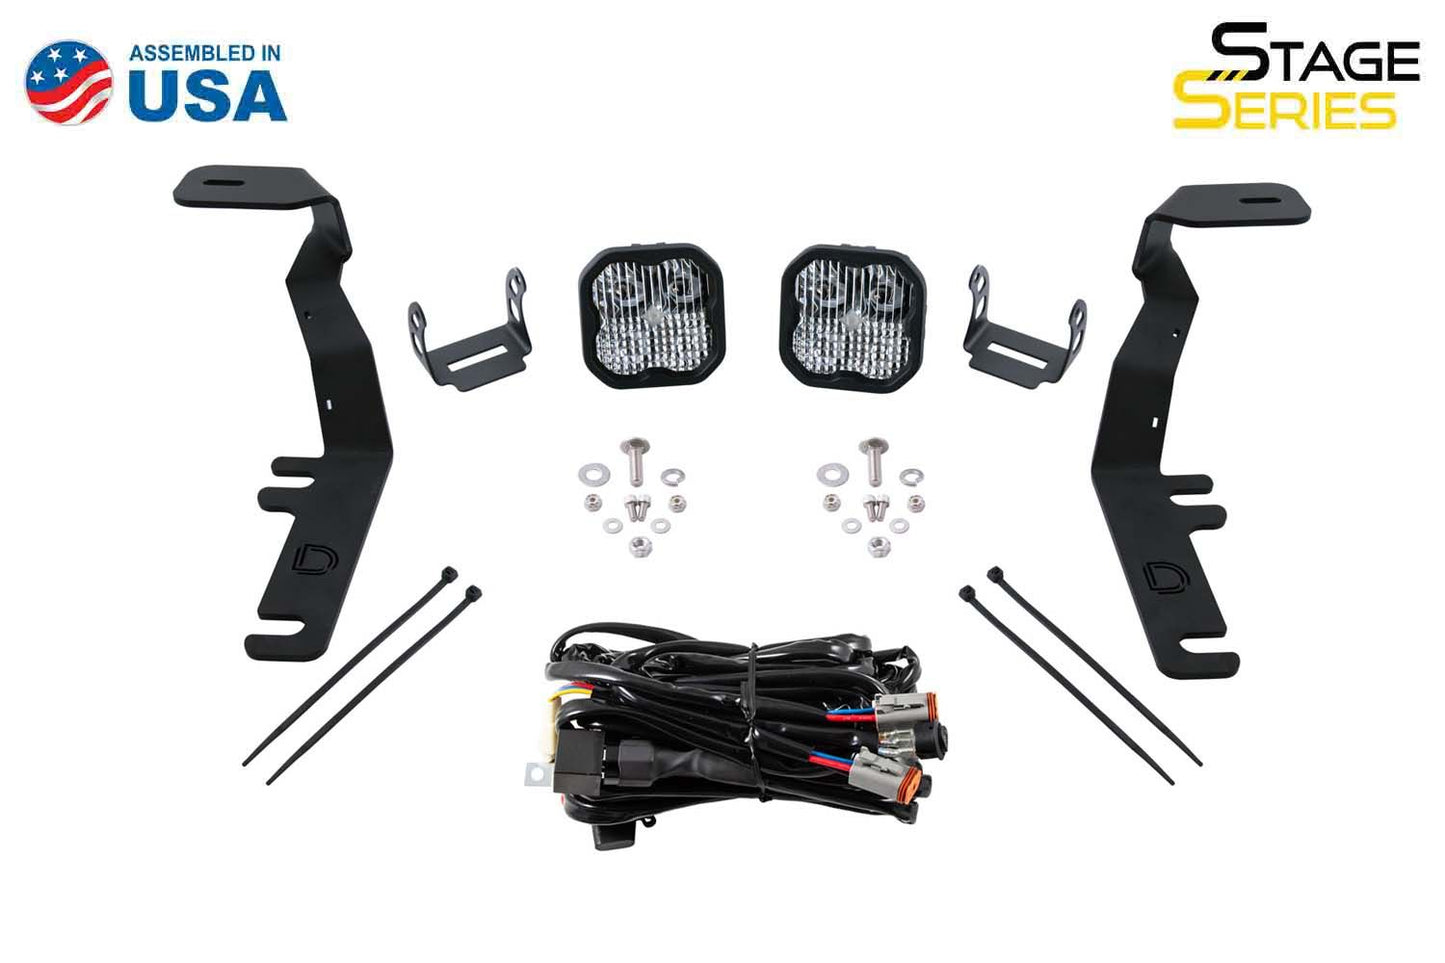 Stage Series Backlit Ditch Light Kit for 2017-2020 Ford Raptor (White Combo)